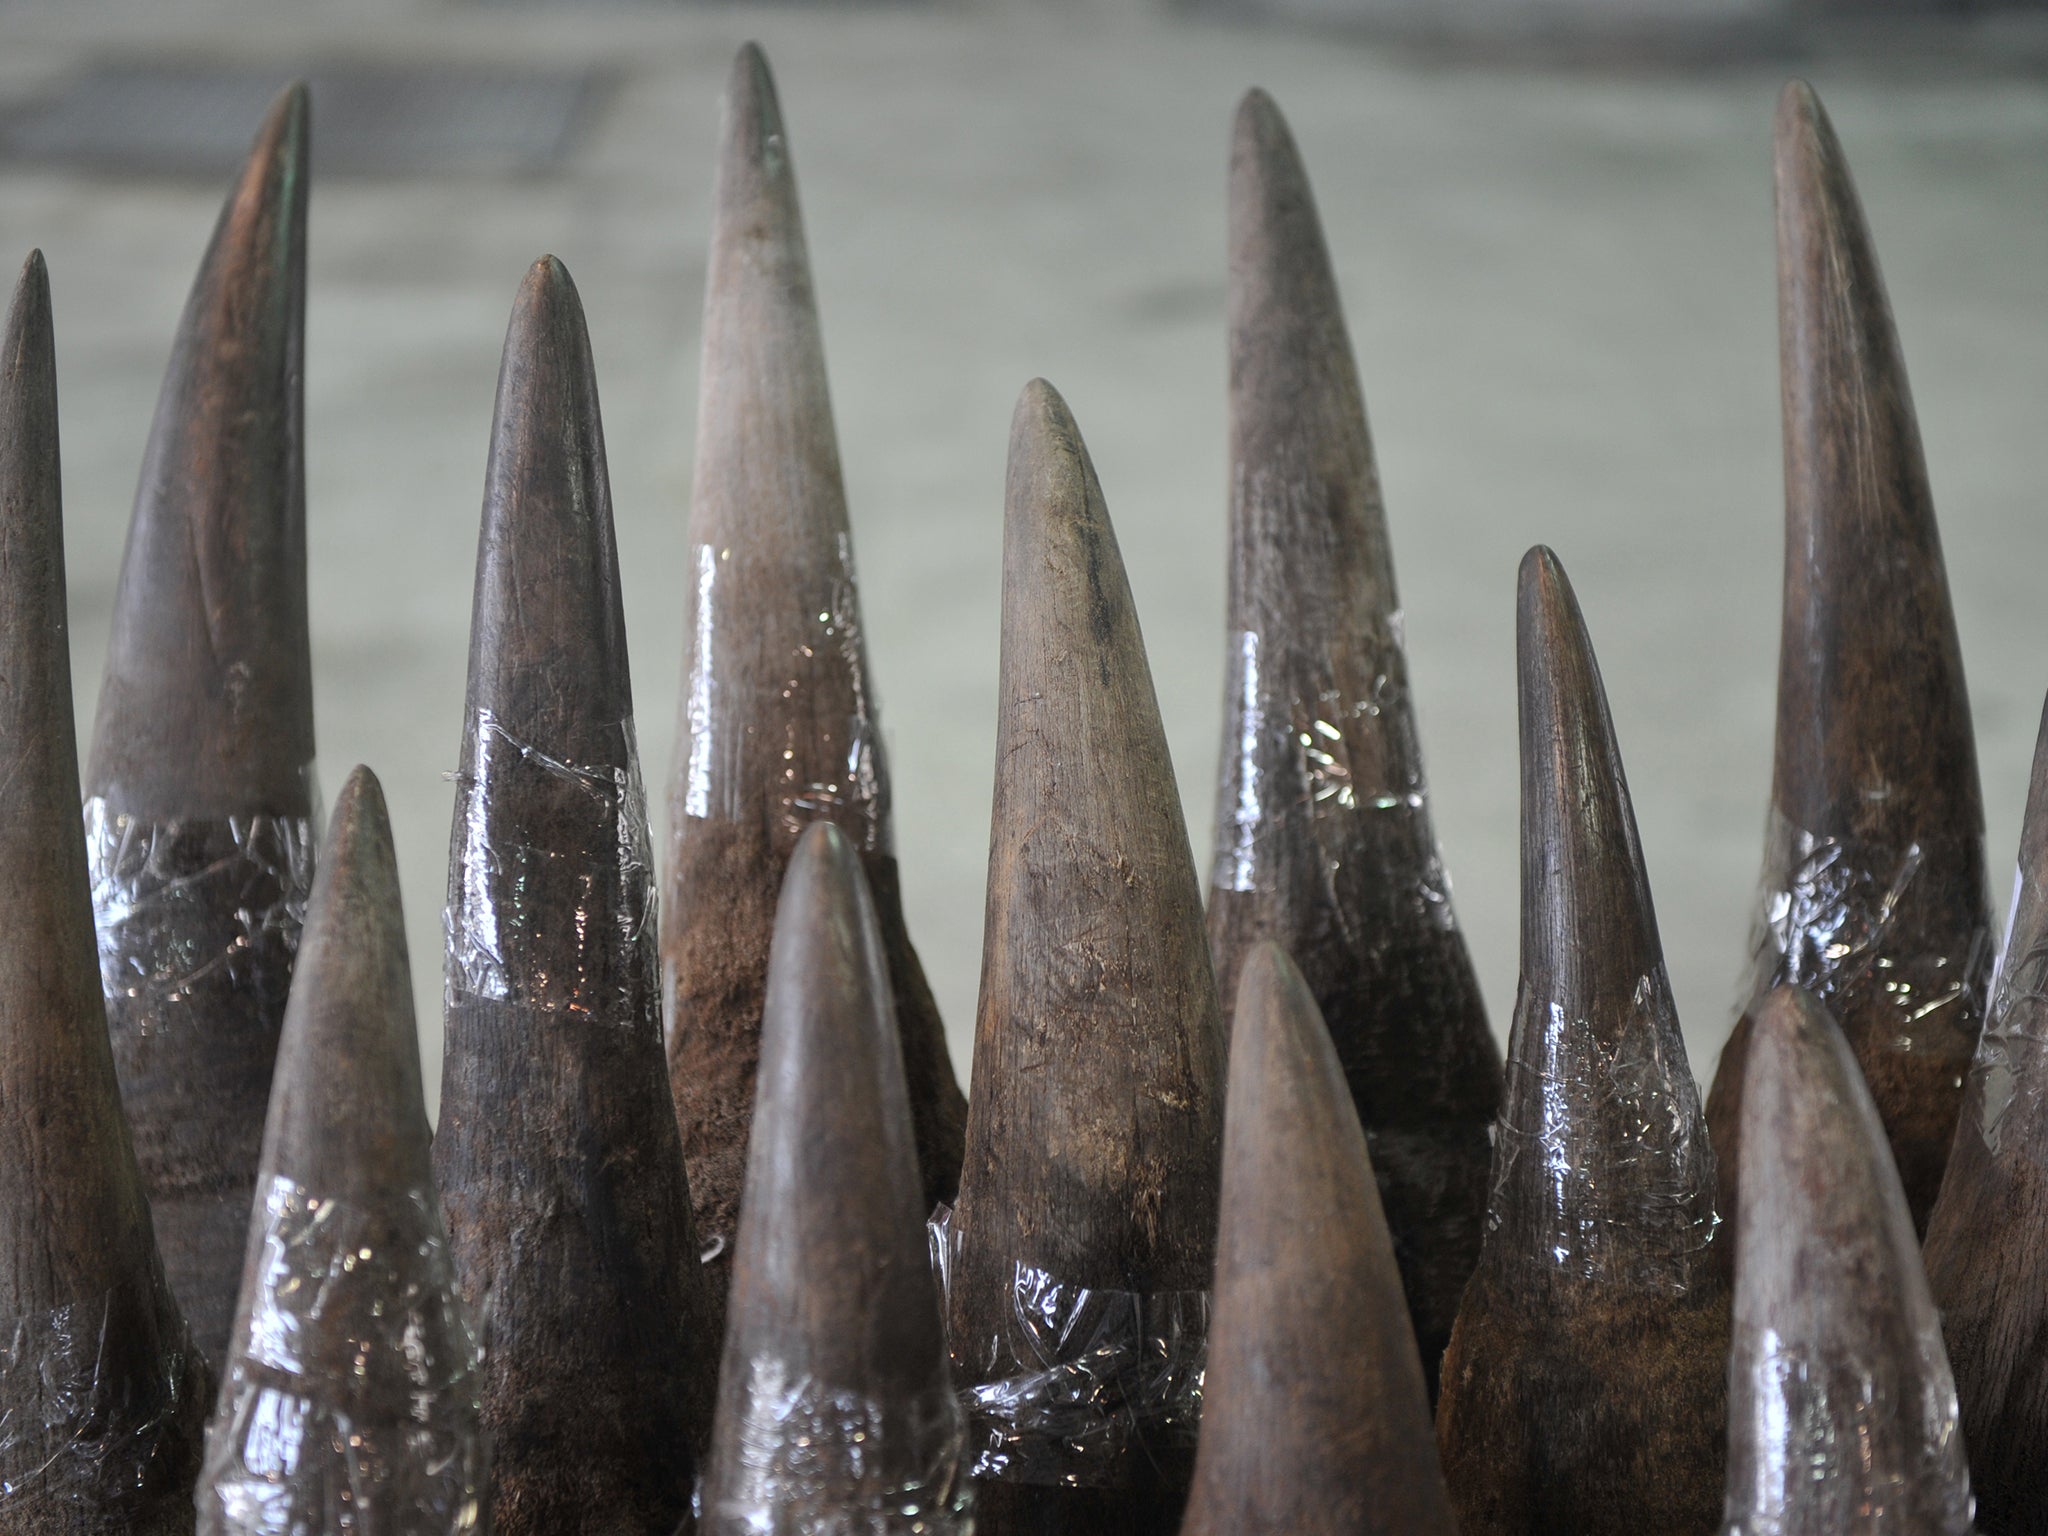 The thieves stole rhino horns and millions of pounds worth of precious artifacts